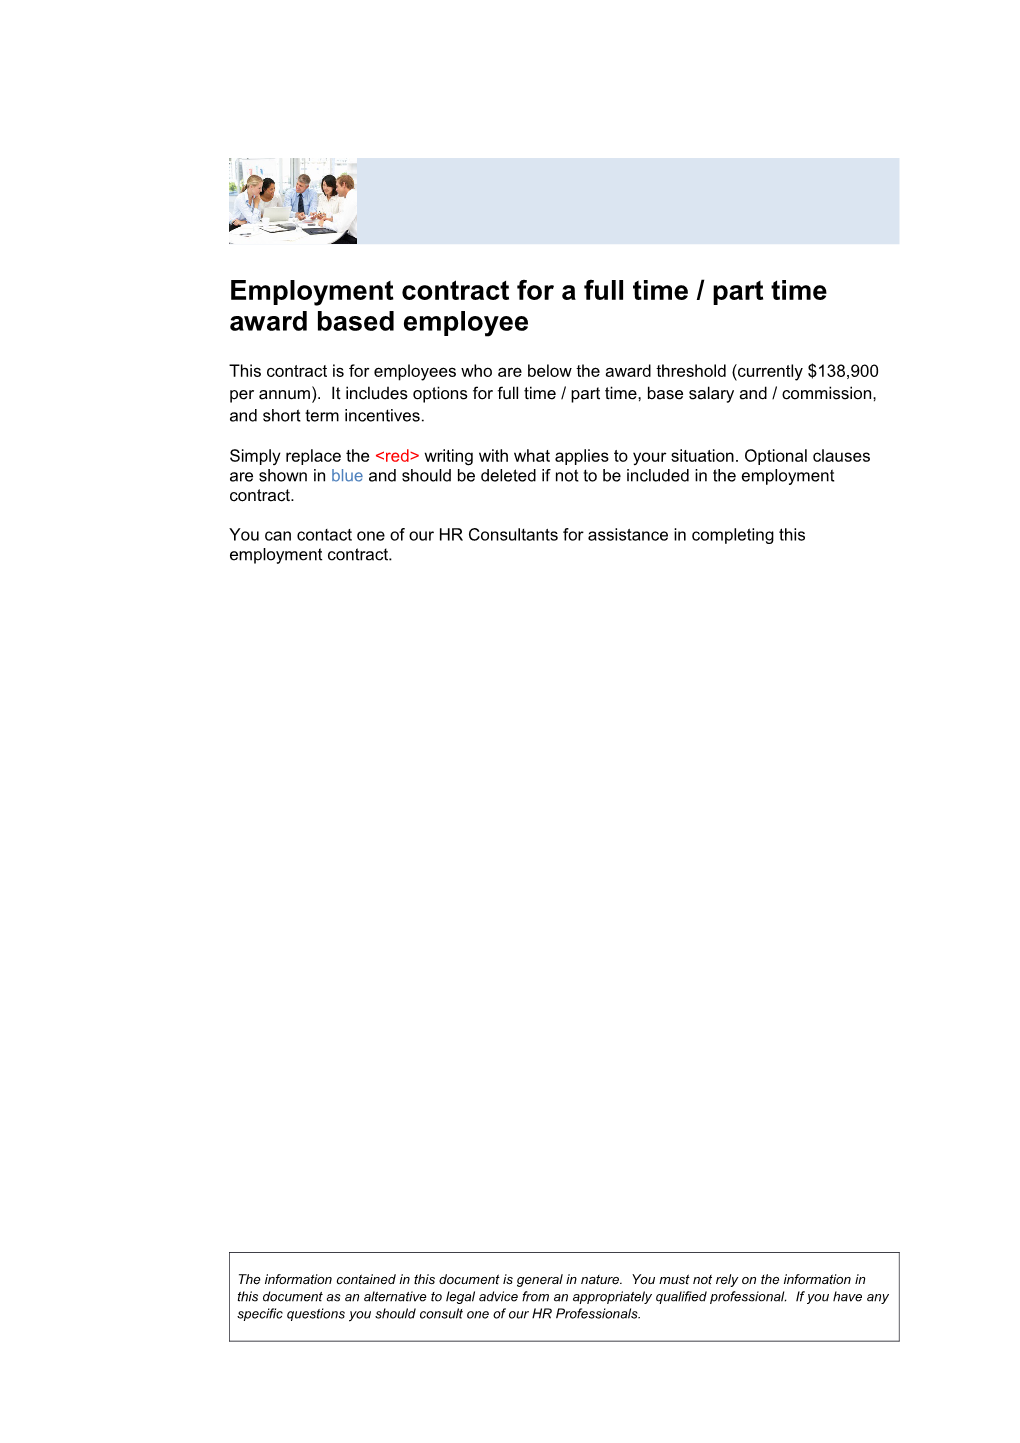 Employment Contract for a Full Time / Part Time Award Based Employee